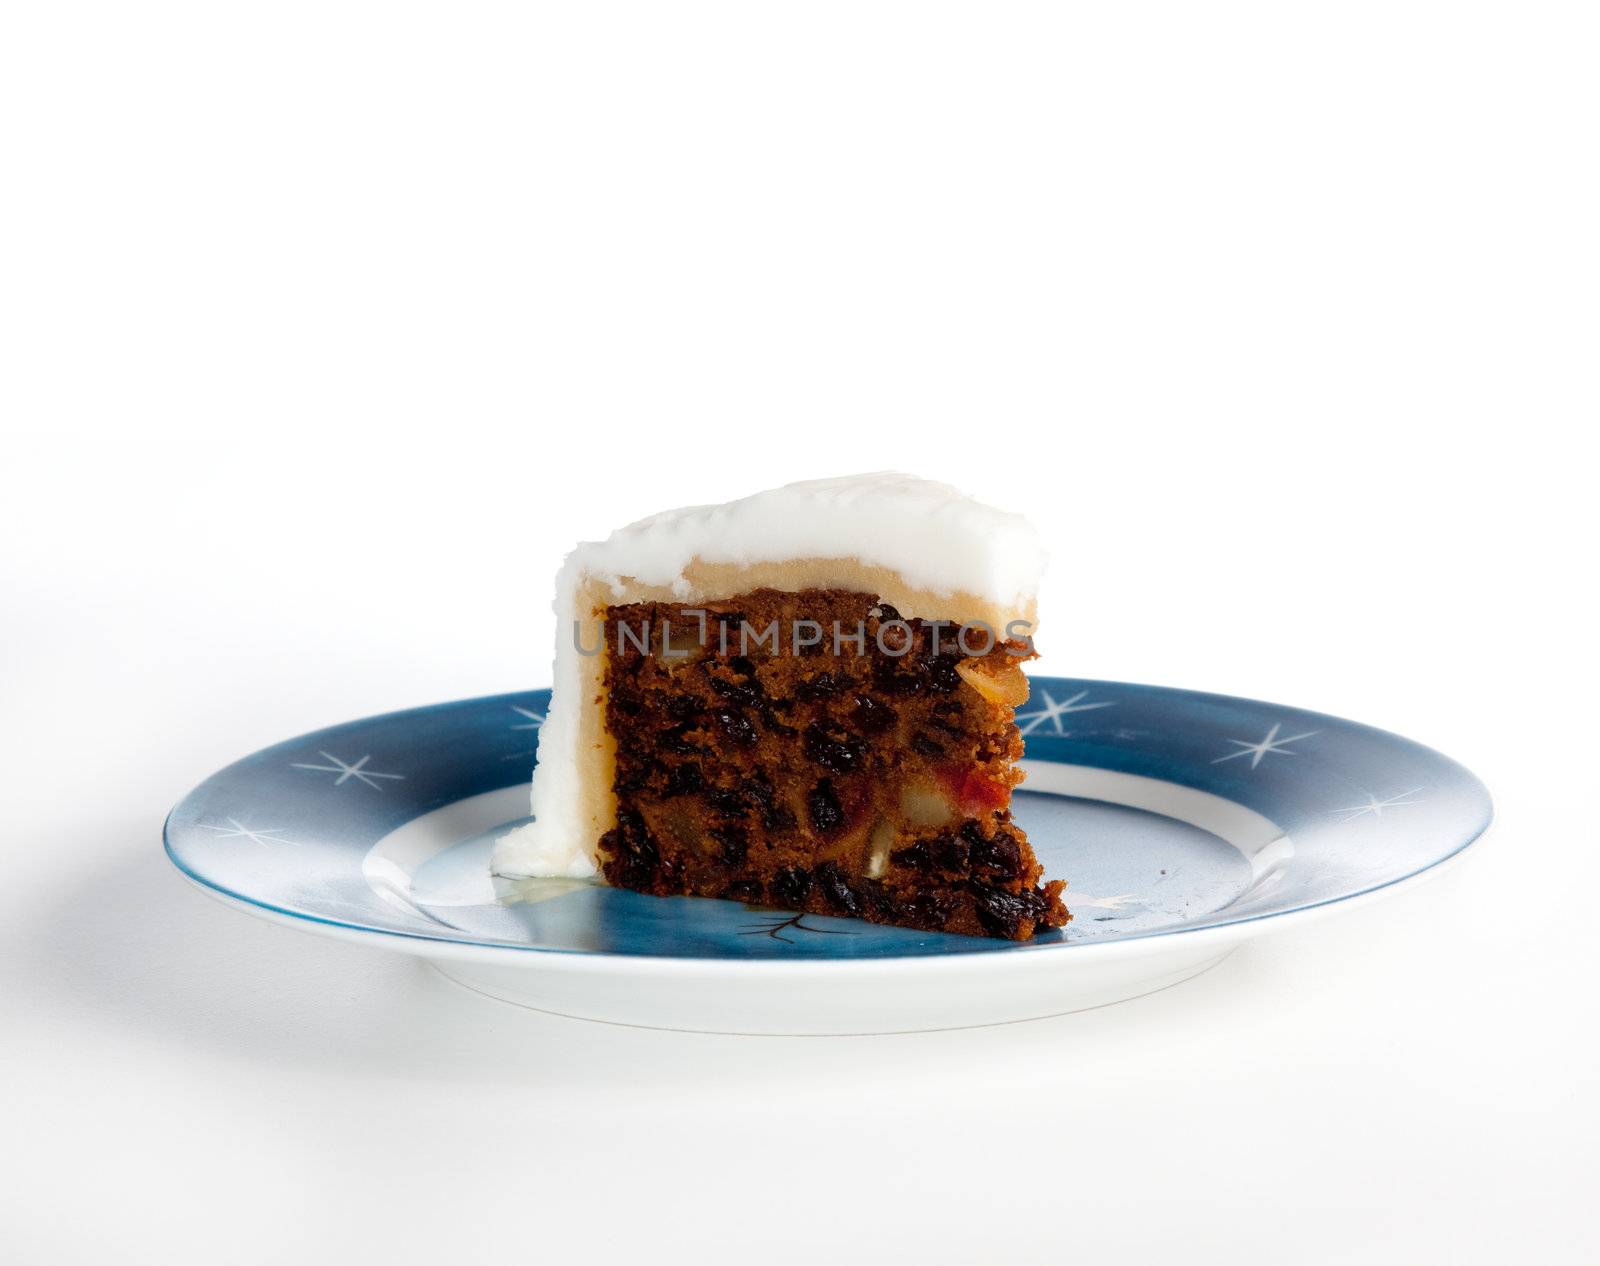 Slice of traditional xmas cake by steheap